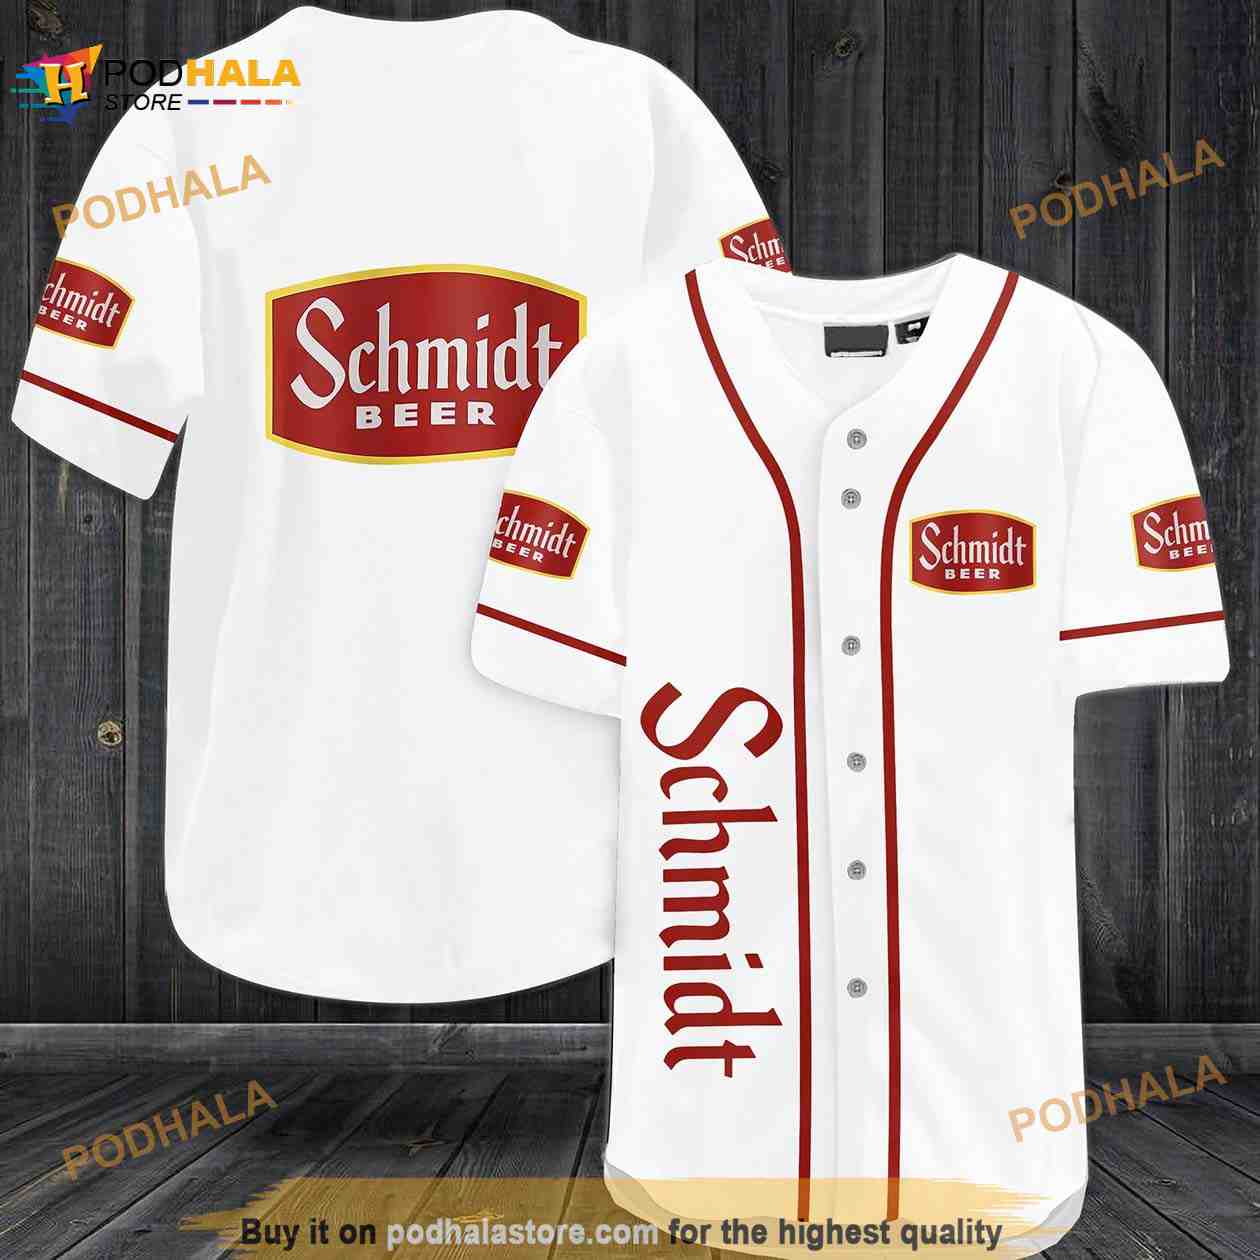 Schmidt Beer 3D Baseball Jersey - Bring Your Ideas, Thoughts And